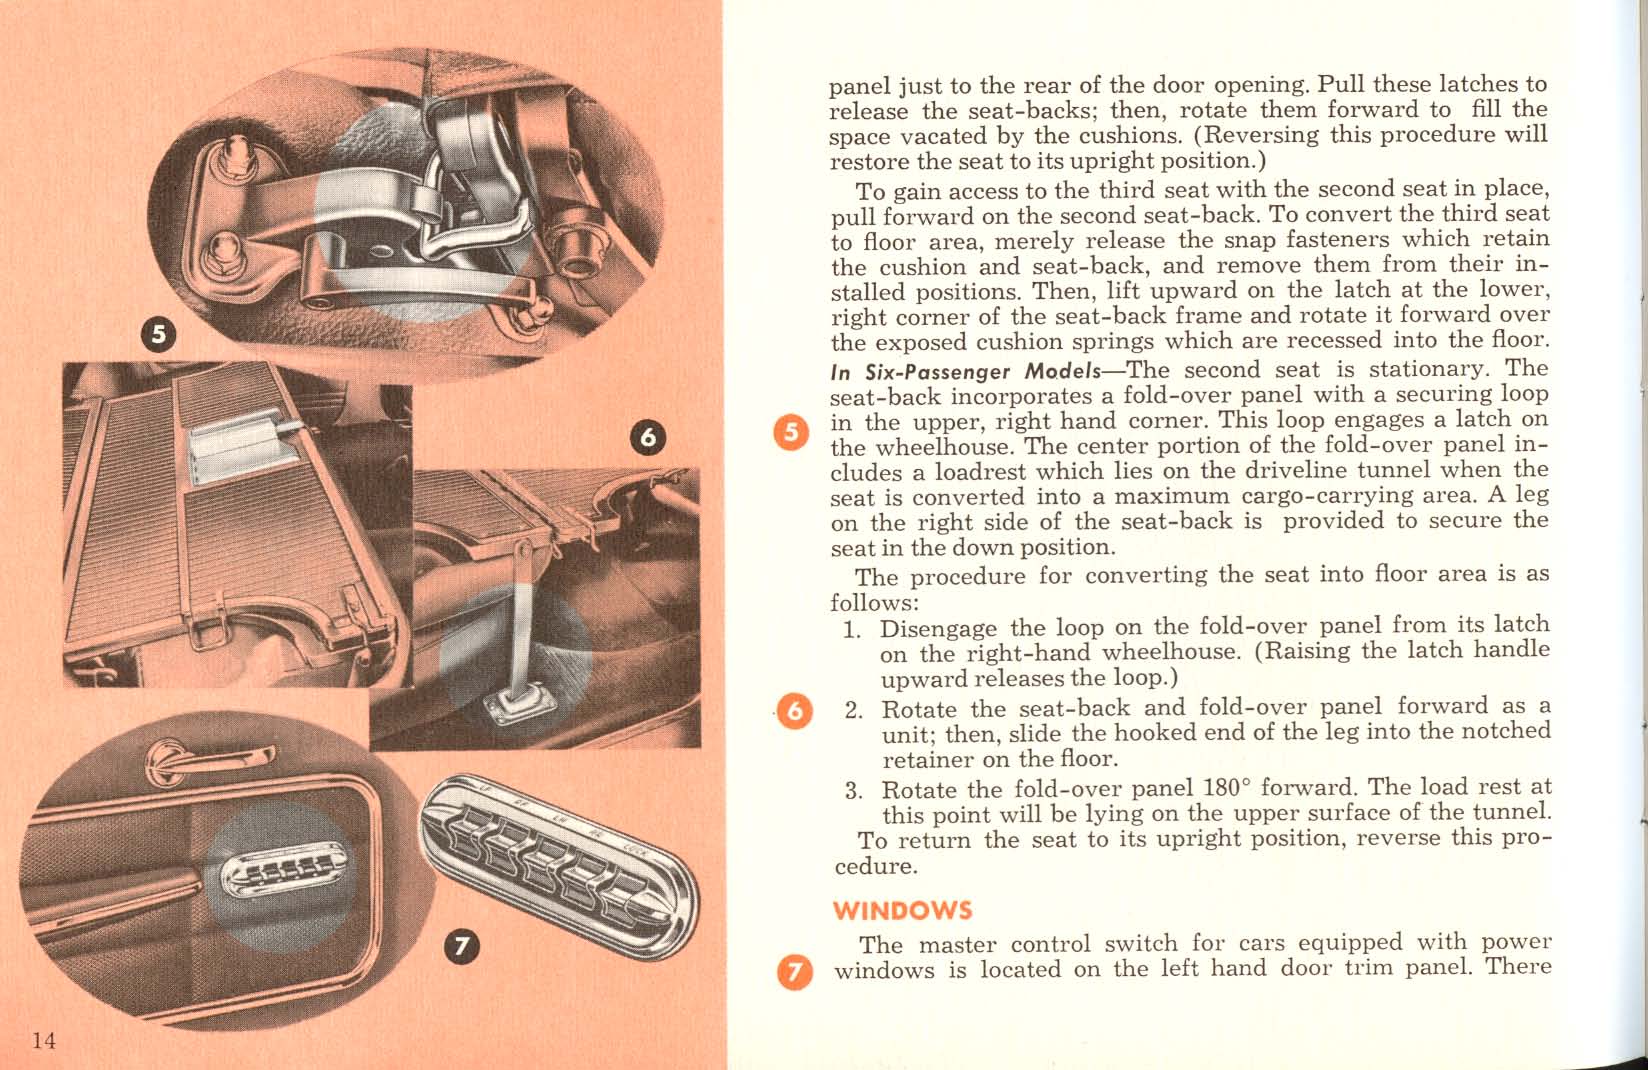 1961 Mercury Owners Manual Page 14